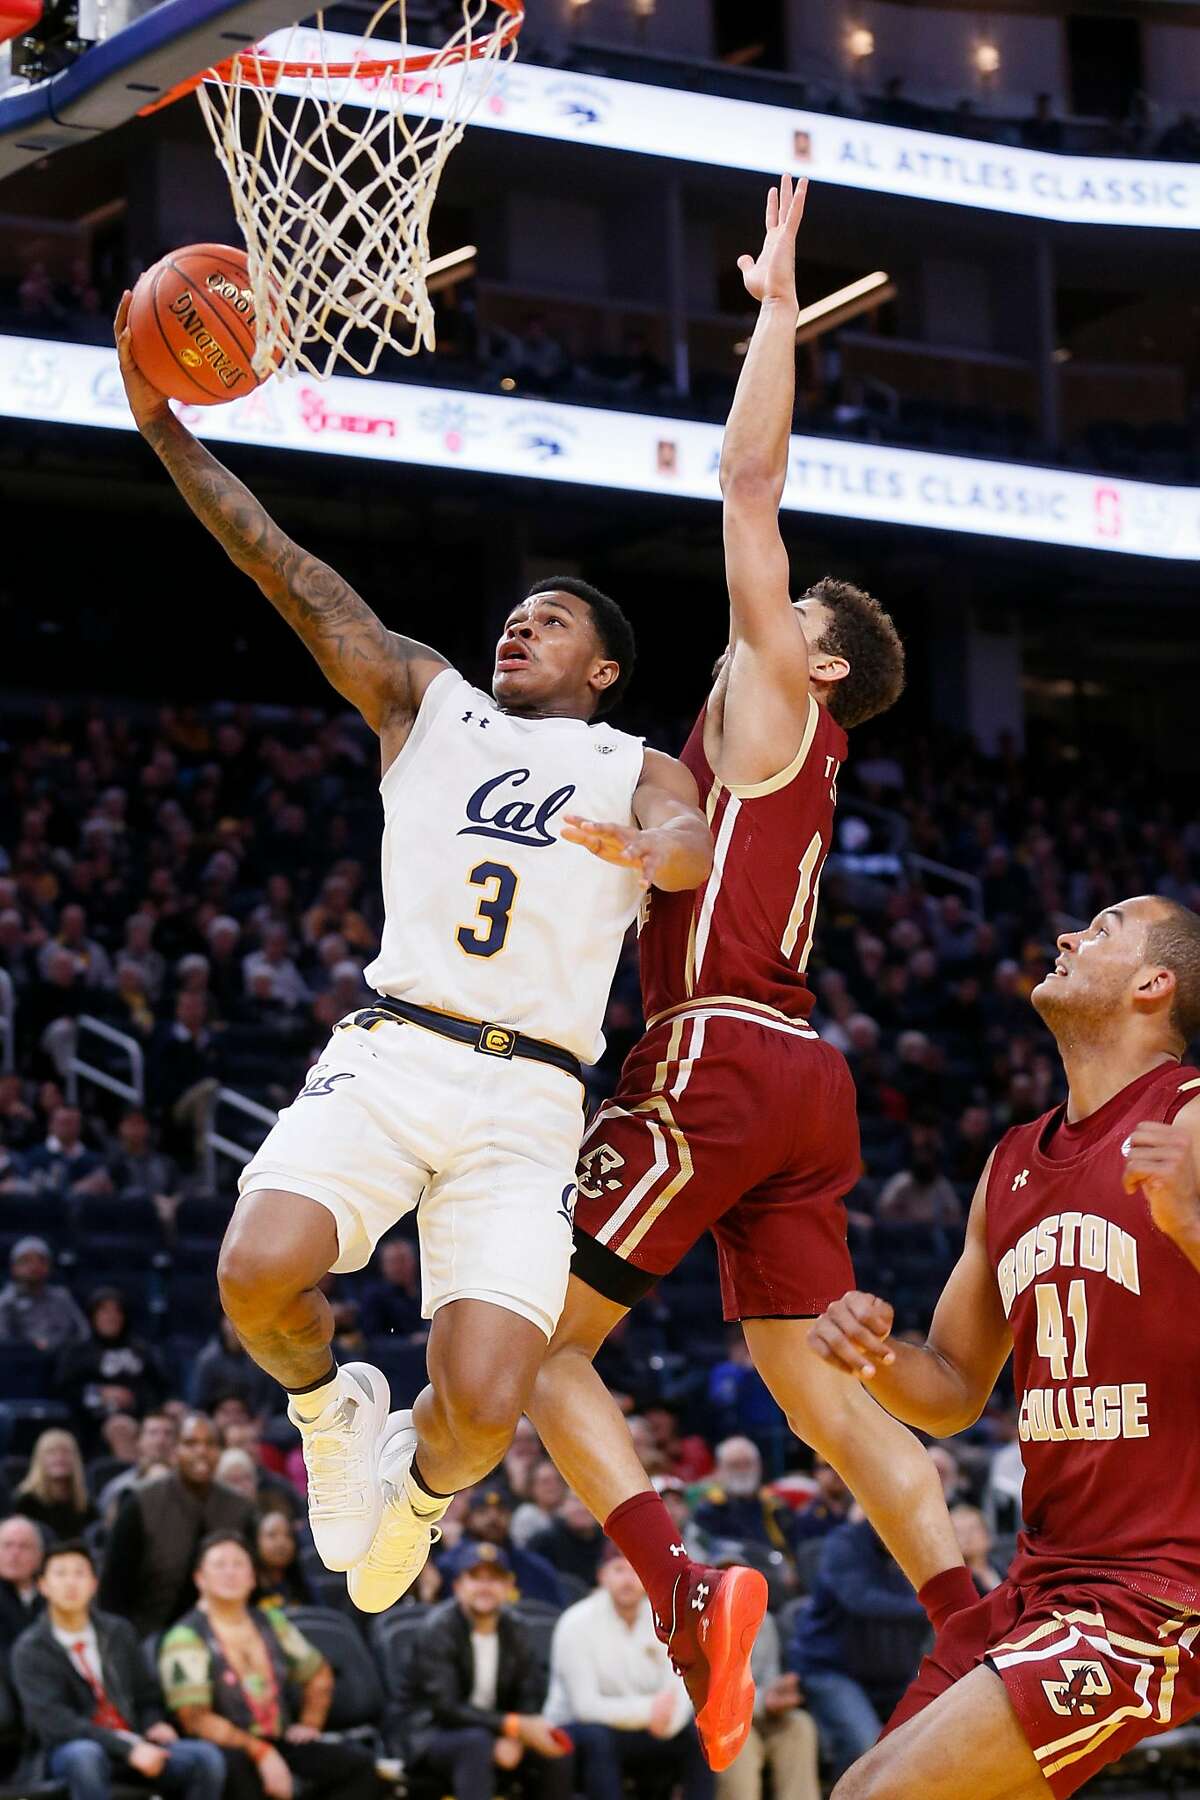 California Golden Bears guard Paris Austin (3) scores against Boston College Eagles guard Derryck Thornton (11) in Session 1 of the Al Attles Classic at Chase Center on Tuesday, Dec. 26, 2019, in San Francisco, Calif.